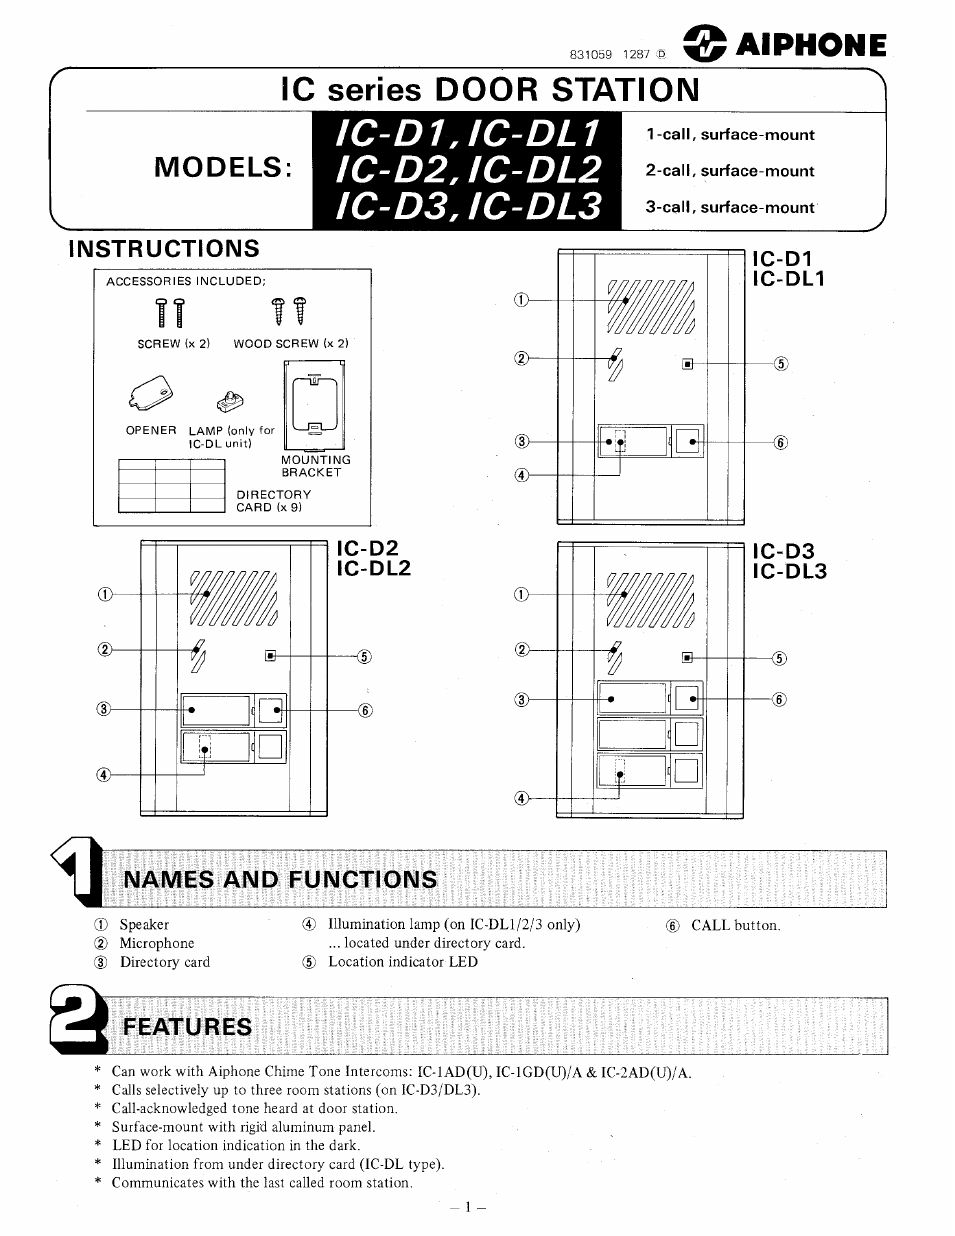 DOOR STATION IC-DL3 (Page 1)